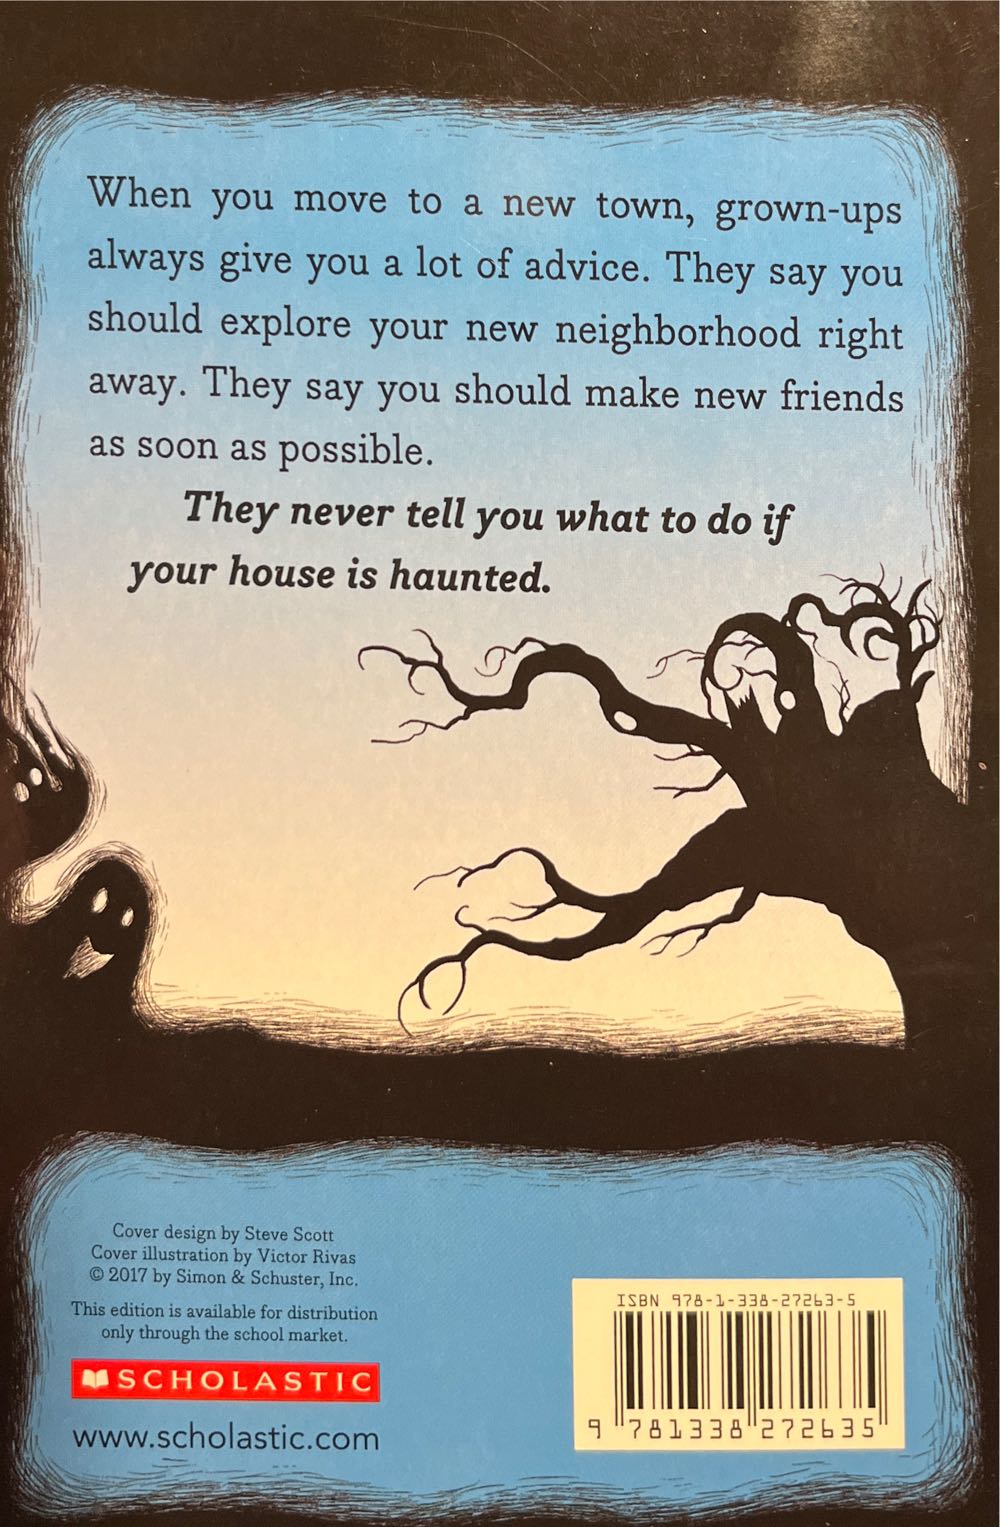 Desmond Cole Ghost Patrol The Haunted House Next Door - Andres Miedoso (Scholastic) book collectible [Barcode 9781338272635] - Main Image 2